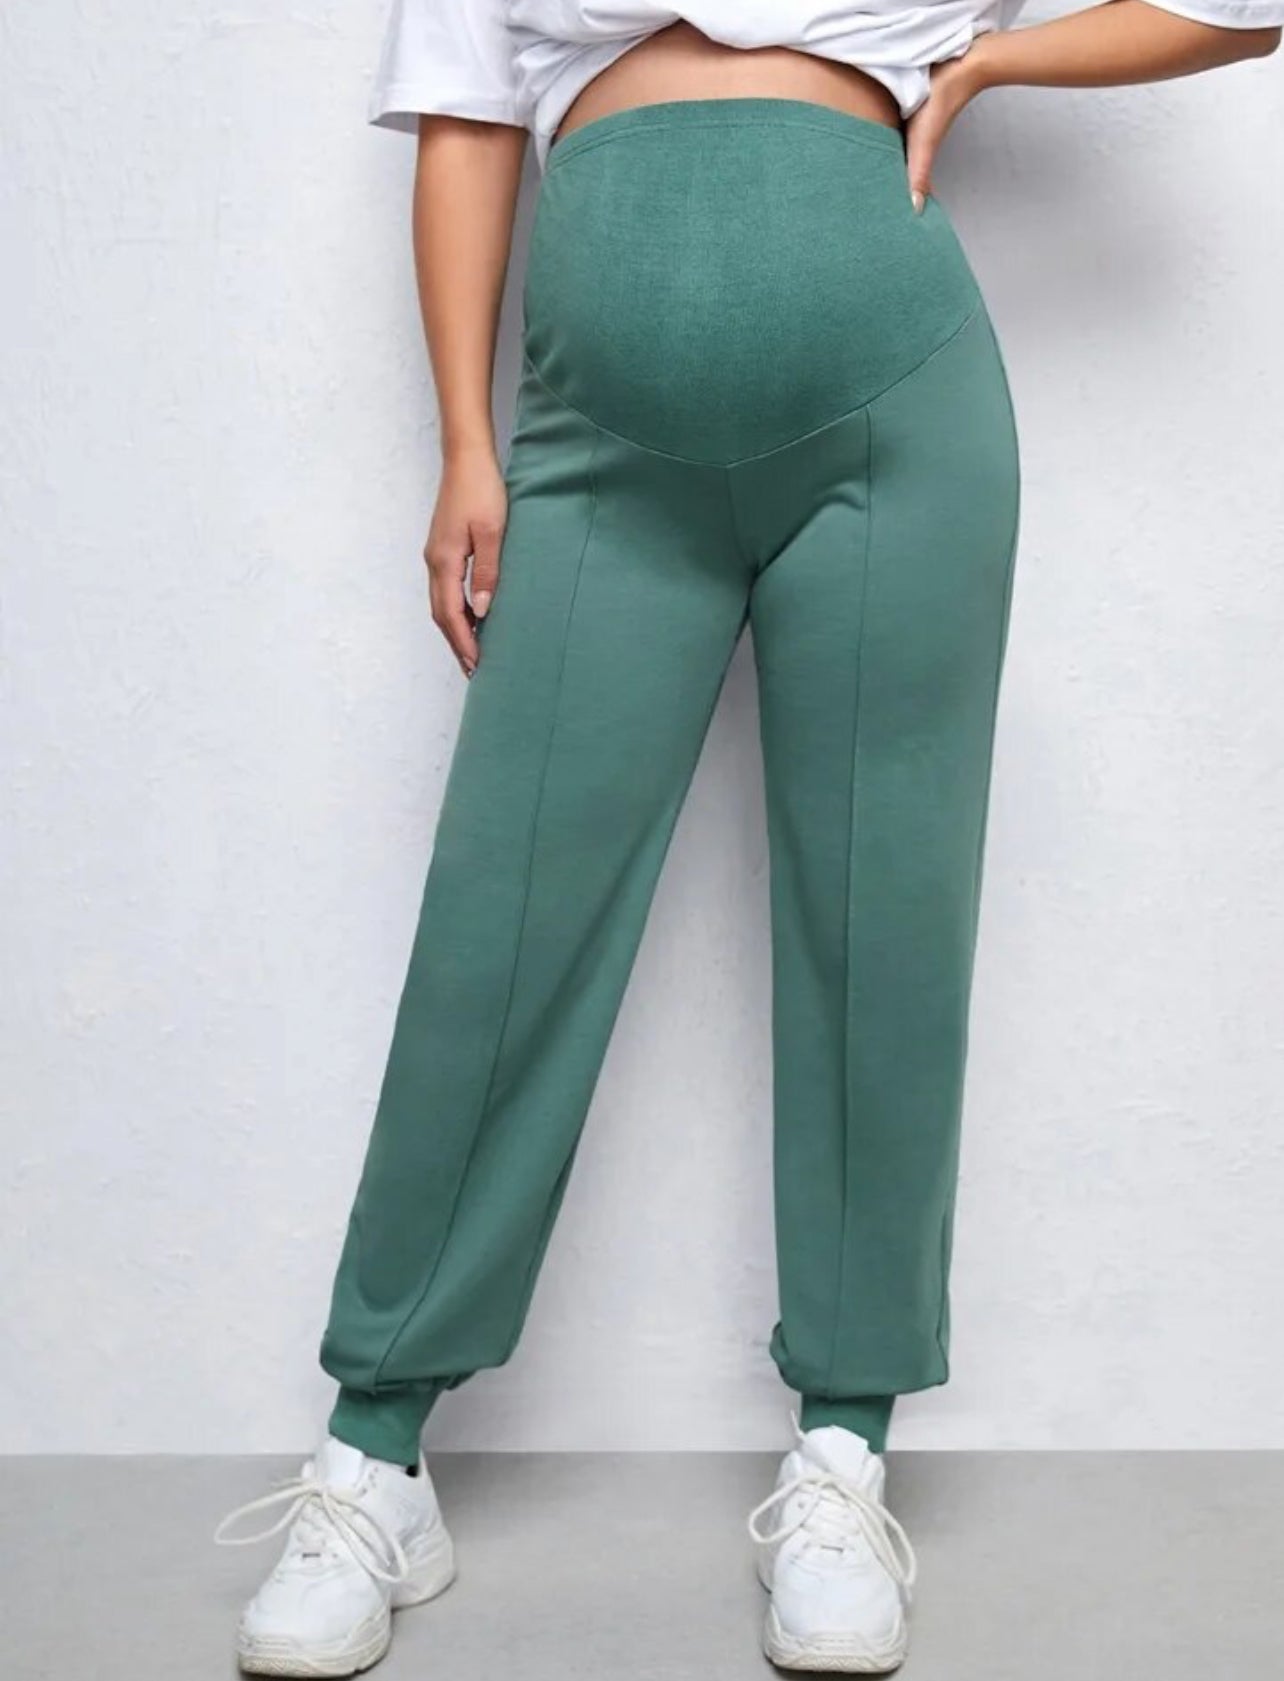 New Solid Color Maternity Jogger Pants, Comfort Pregnant Belly Pants, Belly Bumps 🌟🌙 Collection